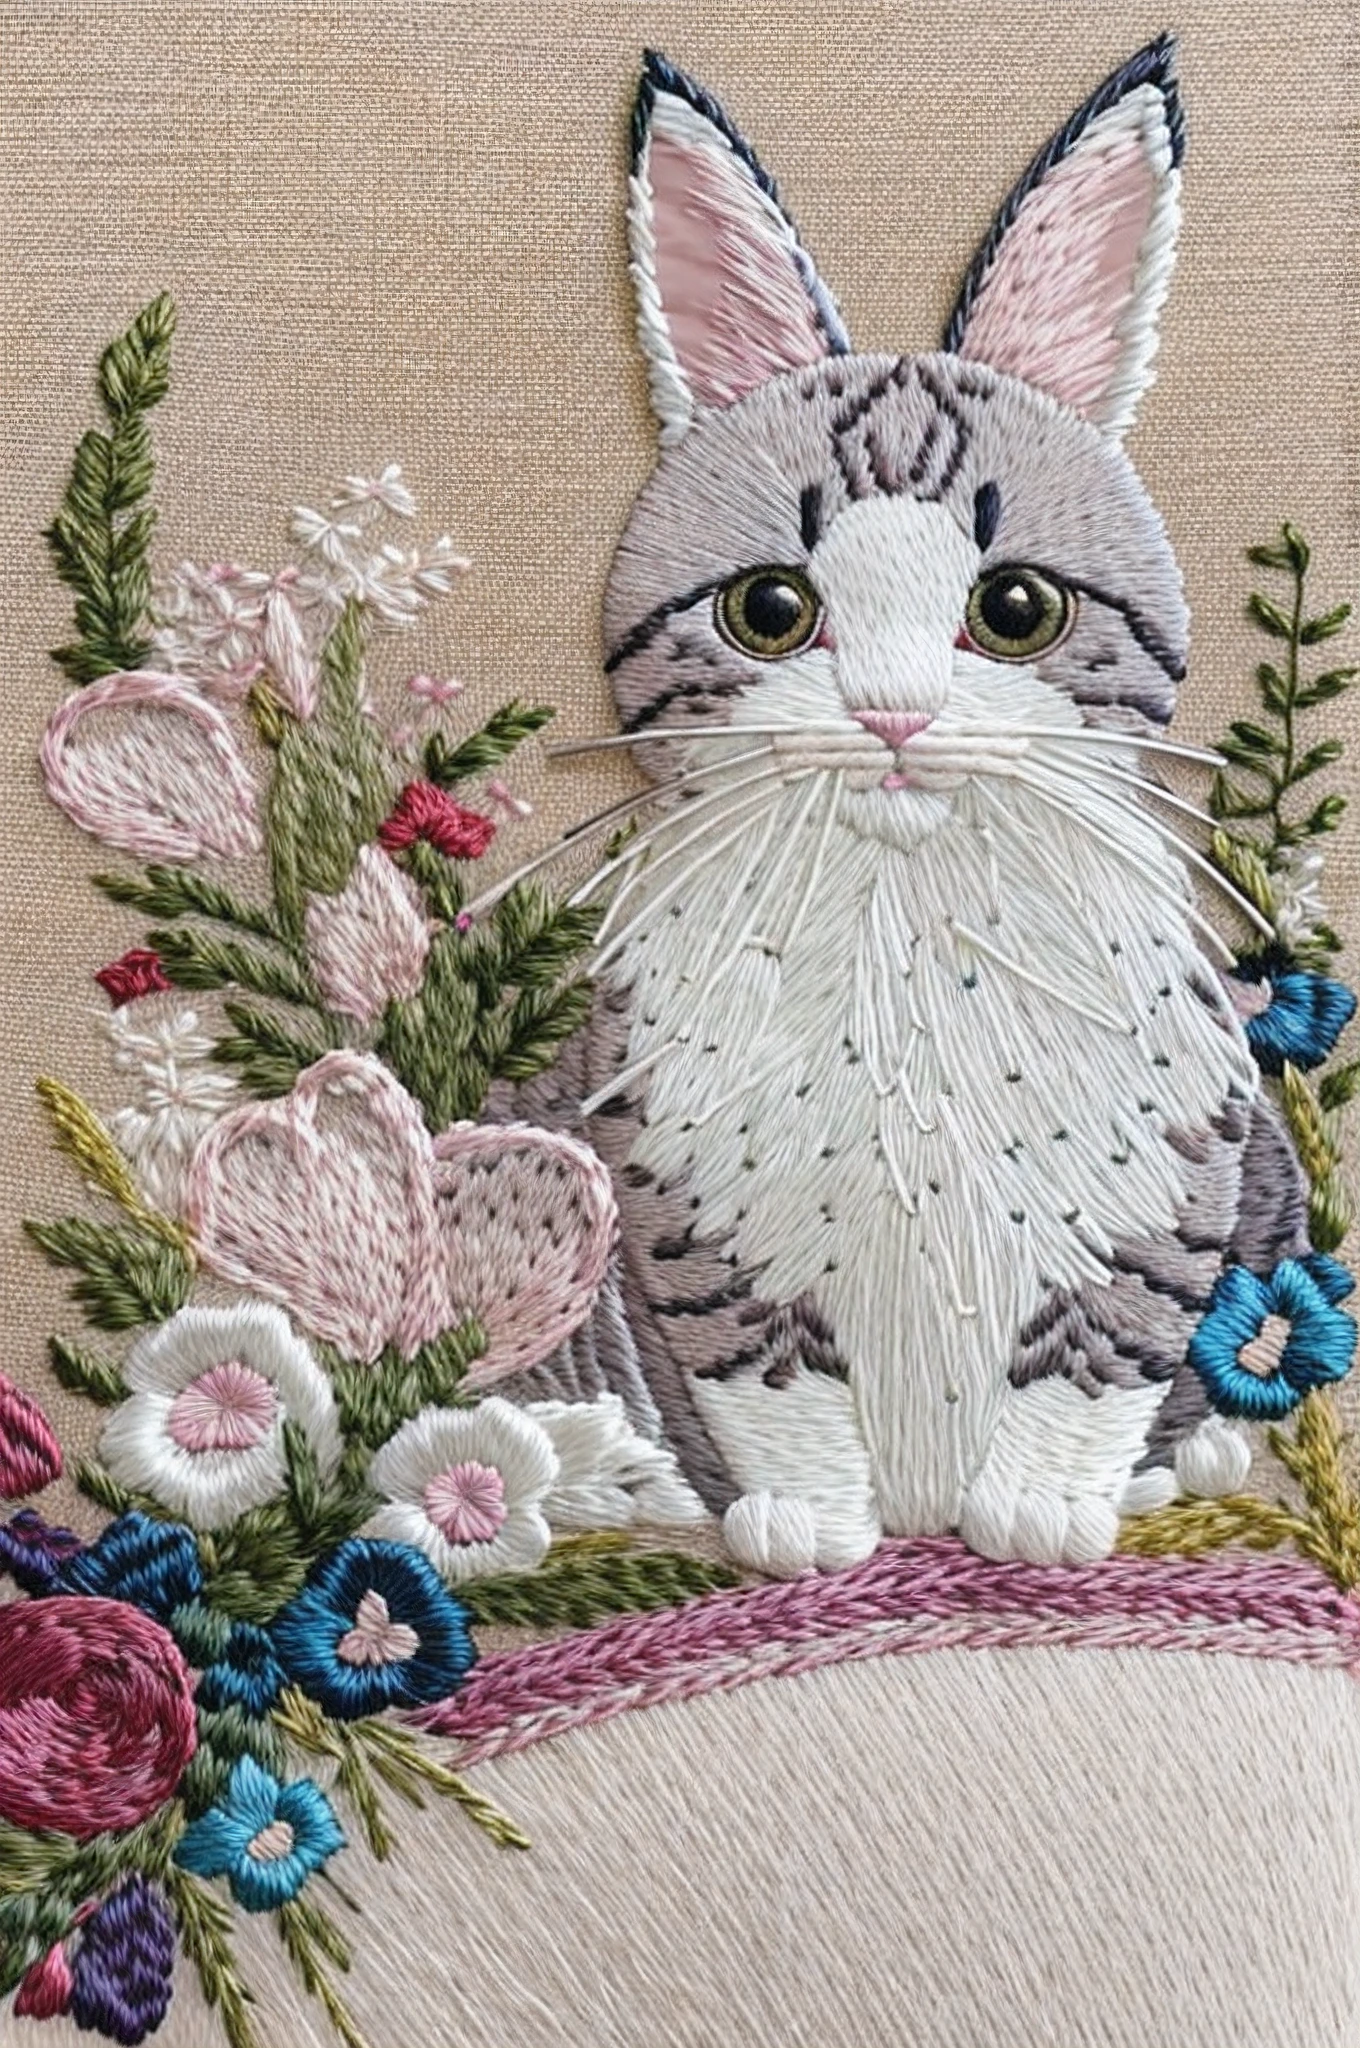 (Embroidery/embroidery/embroideries:1.2) , fluffy kittens,adorable bunny ears,delicate stitches,colorful threads,needlework art,soft and cuddly fabric,handcrafted masterpiece,meticulous attention to detail,tiny paw prints,playful expressions,embroidered whiskers,lovely floral patterns,vibrant and lively colors,gently glowing background lighting,artistic composition,exquisite embroidery techniques,precise needlework,expressive animal eyes,fluffy fur textures,meticulously stitched animals,breathtakingly charming scene,highly realistic embroidery,heartwarming and adorable,beautifully embroidered animals.